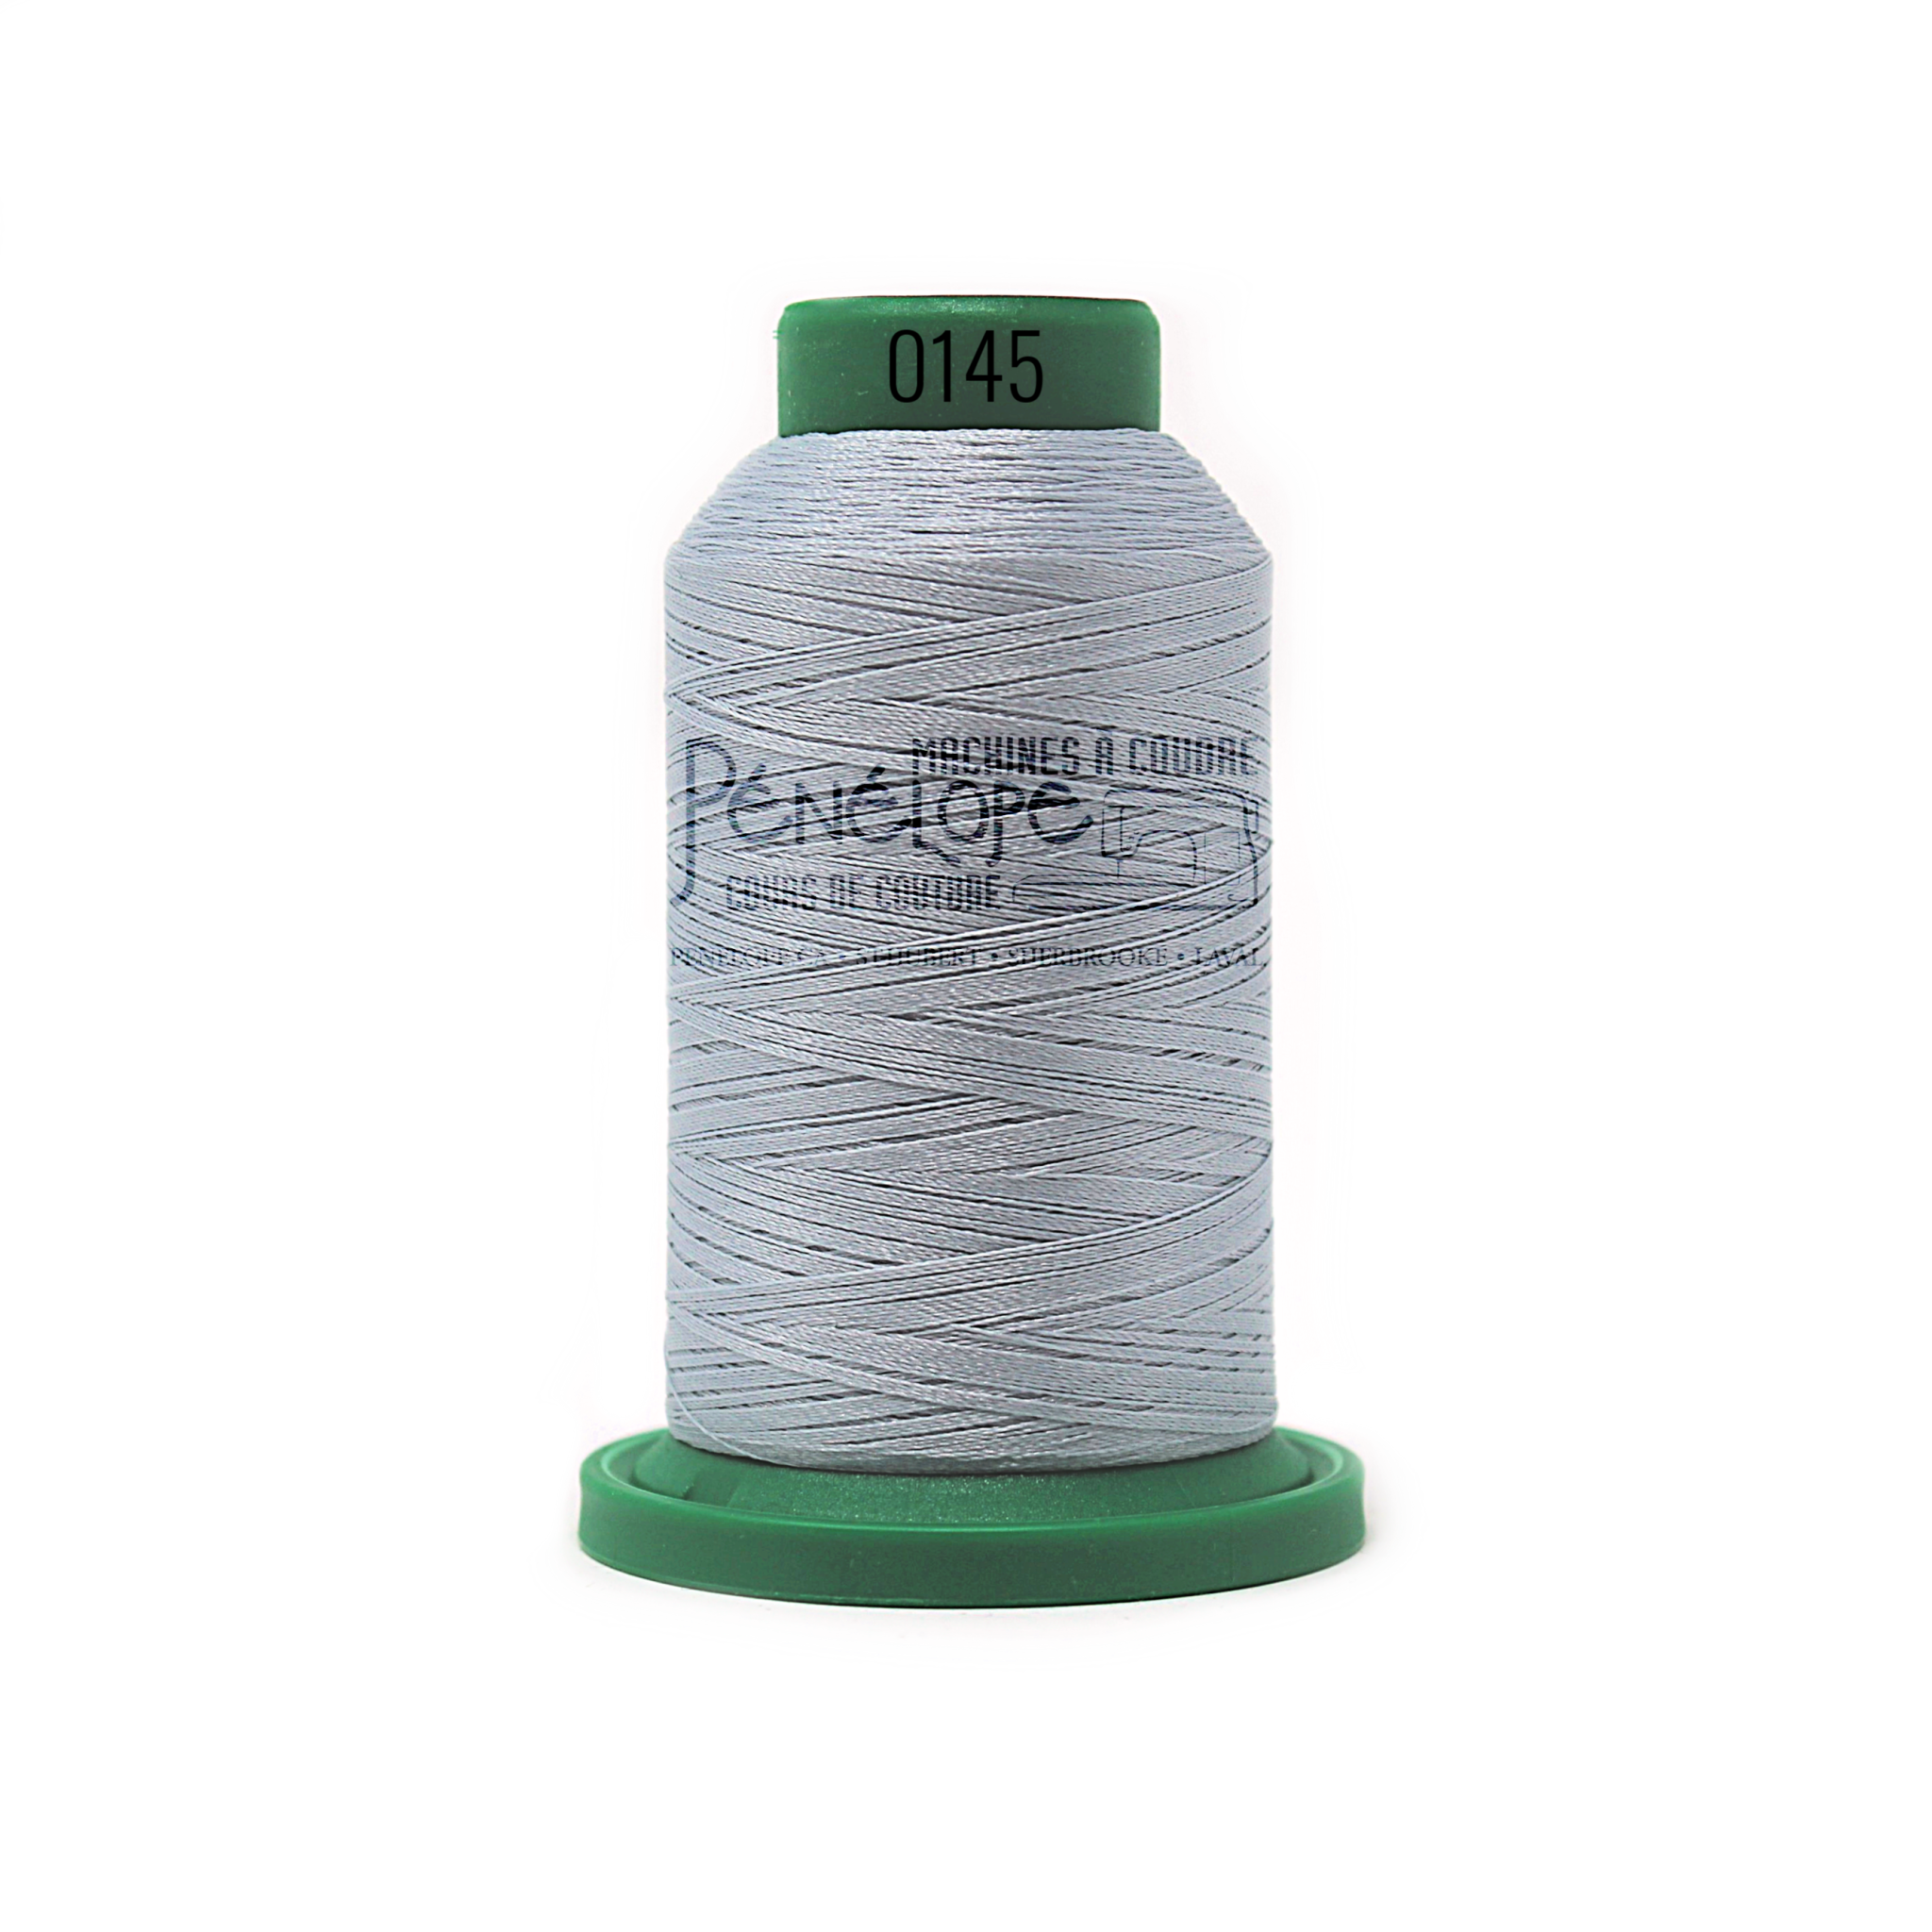 Isacord Isacord sewing and embroidery thread 0145